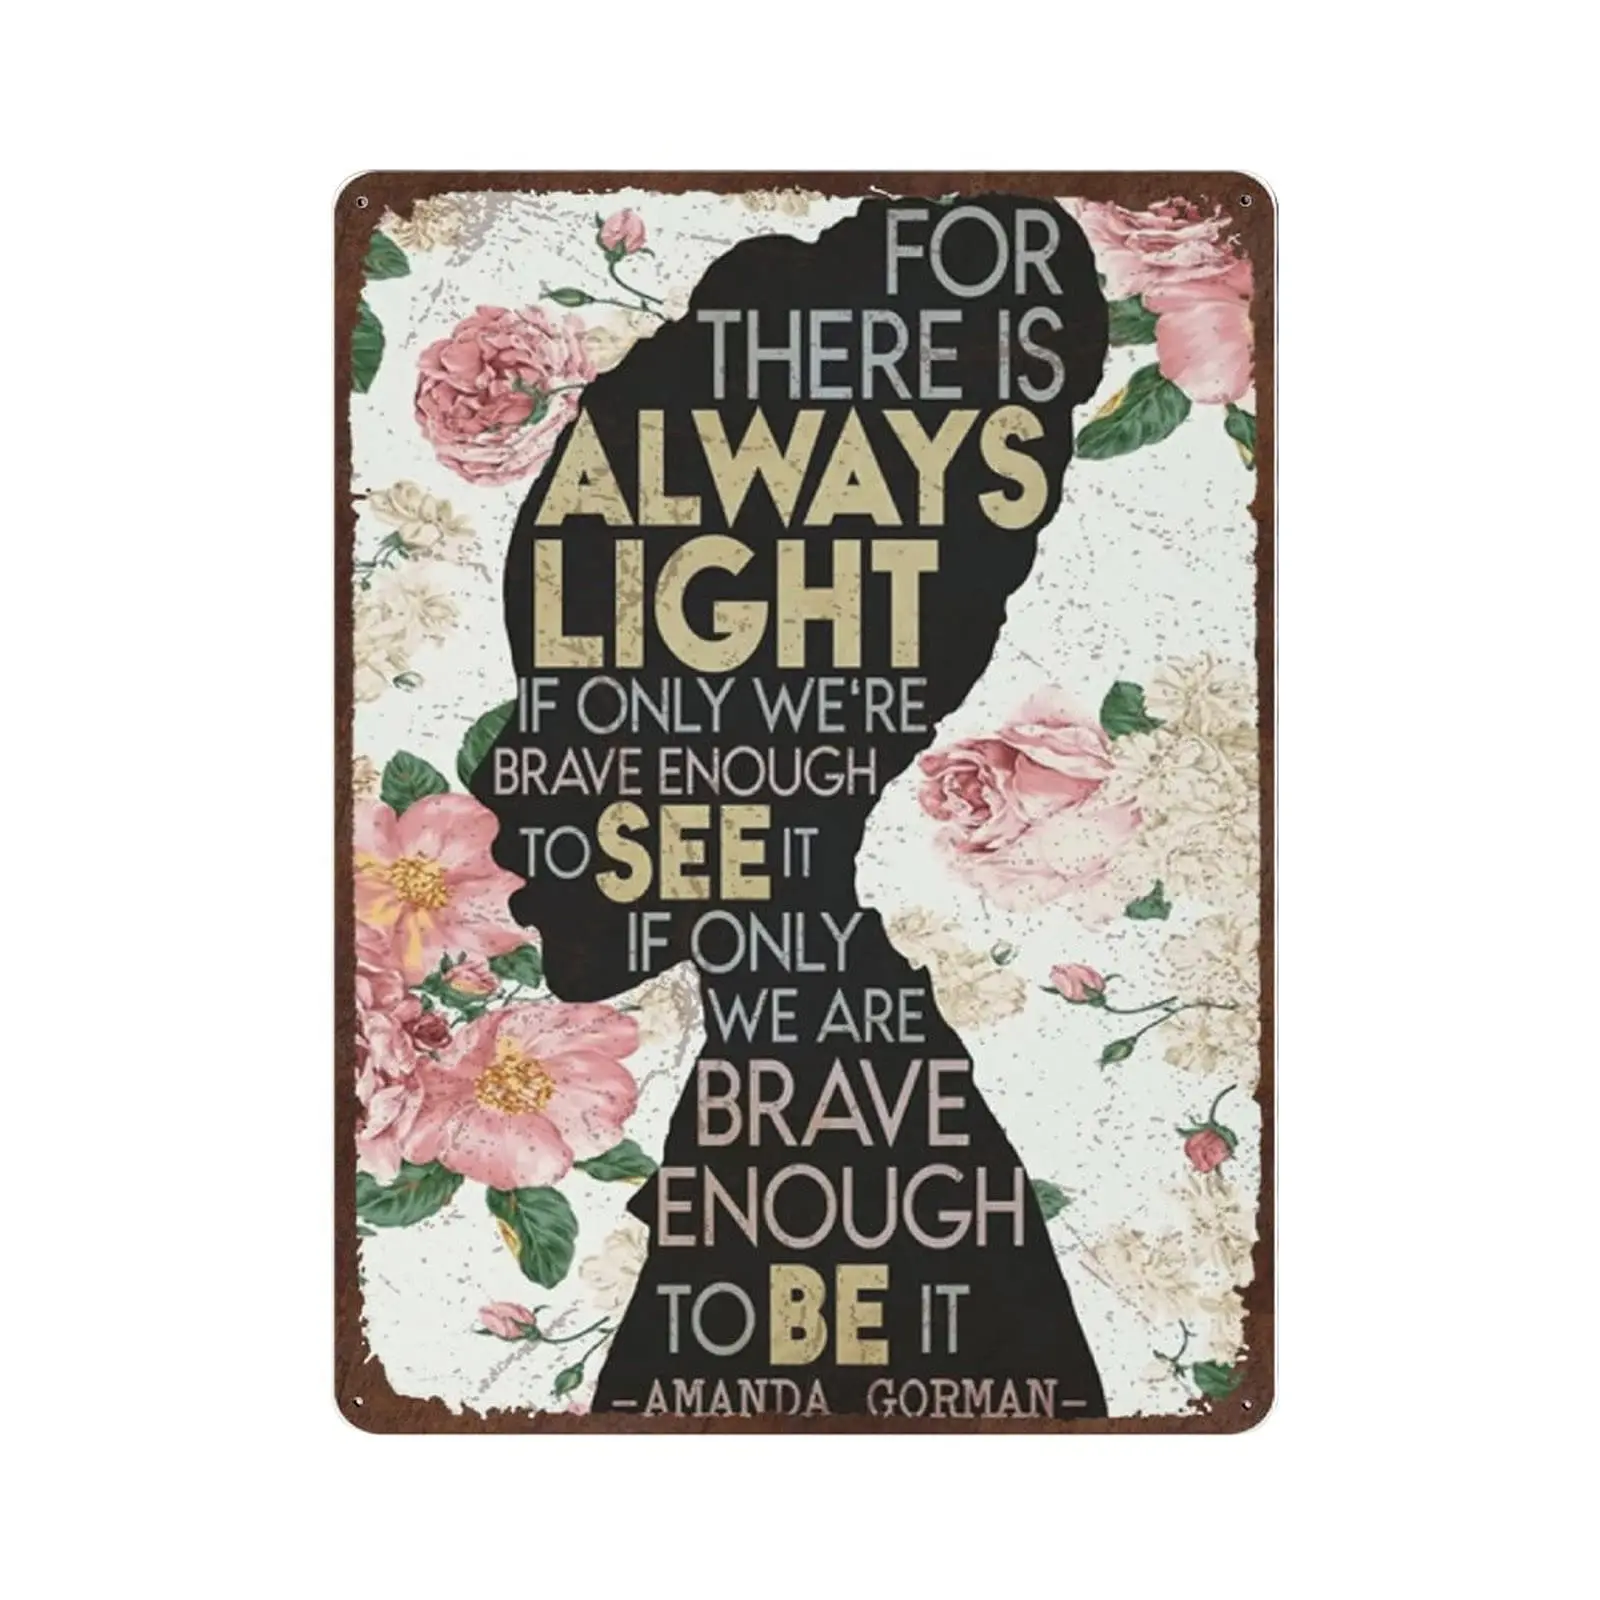 

Dreacoss Amanda Gorman Tin Sign for There is Always Light Tin Sign, Black History Month -Retro Style Metal Sign-Inspirational Po